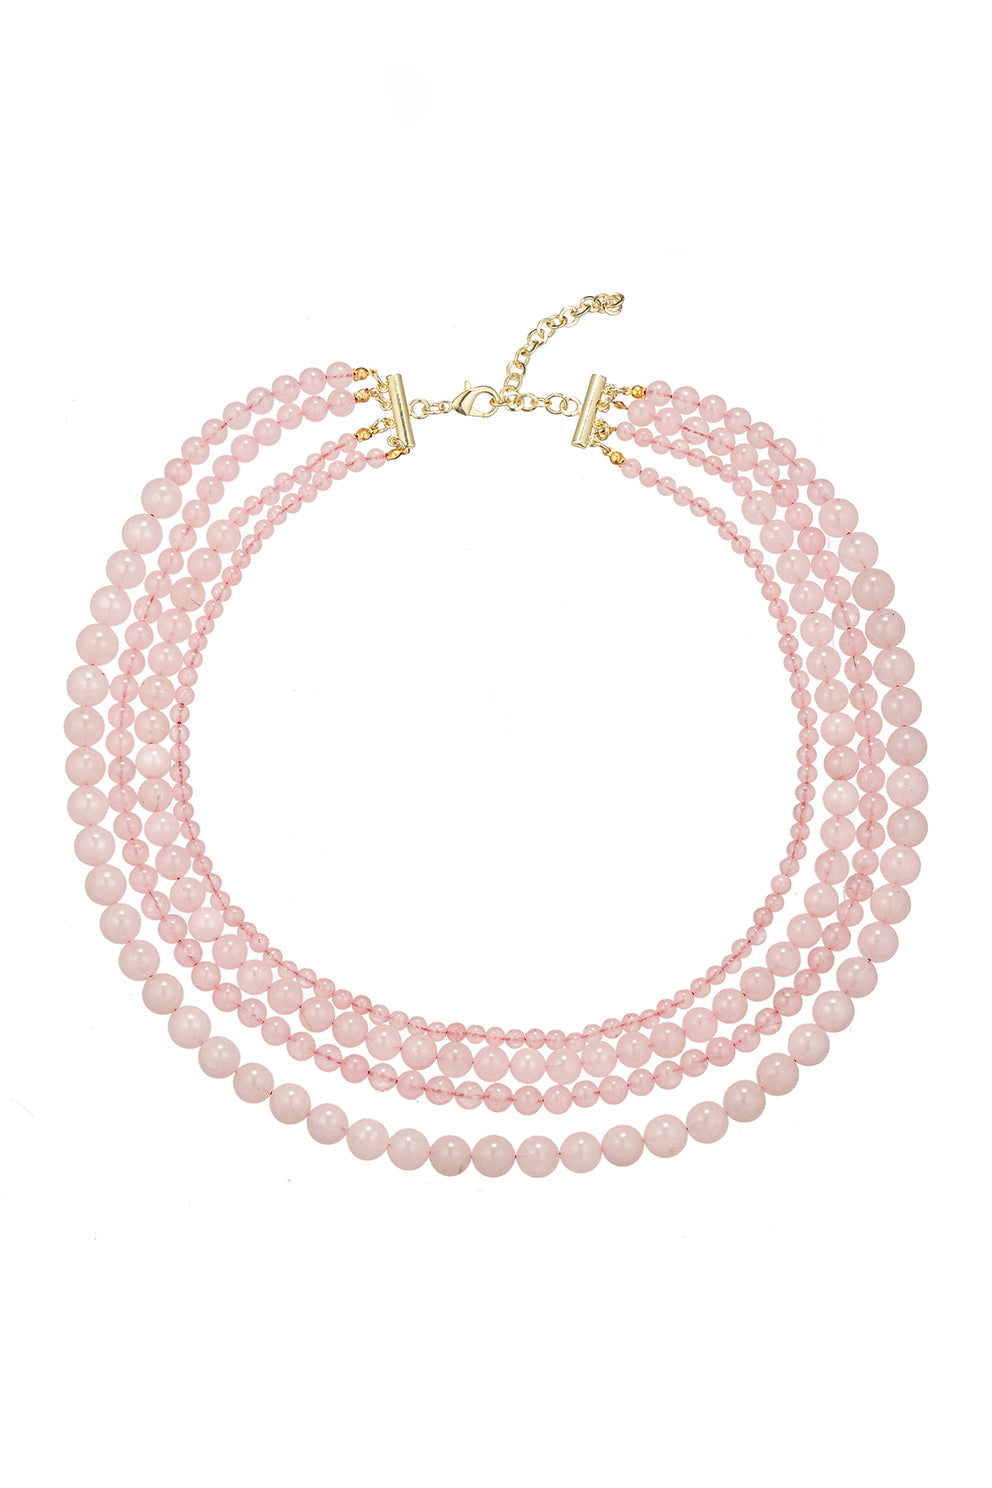 Embrace elegance with a multi-strand necklace featuring rose quartz agate beads, radiating a soothing and fashionable aura.